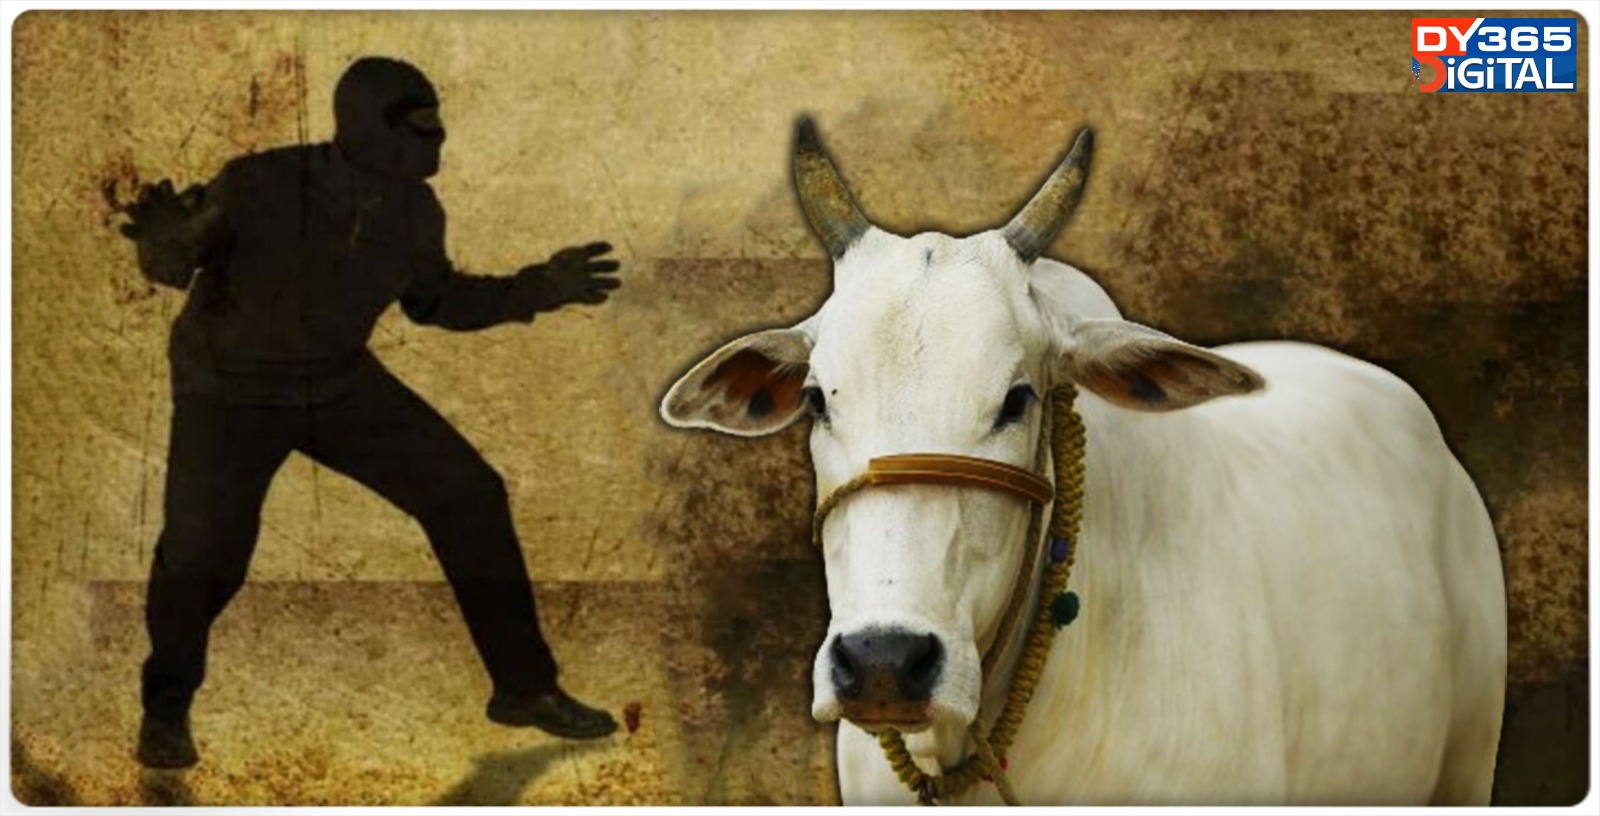 assam-two-cows-stolen-from-cattle-shed-in-khetri